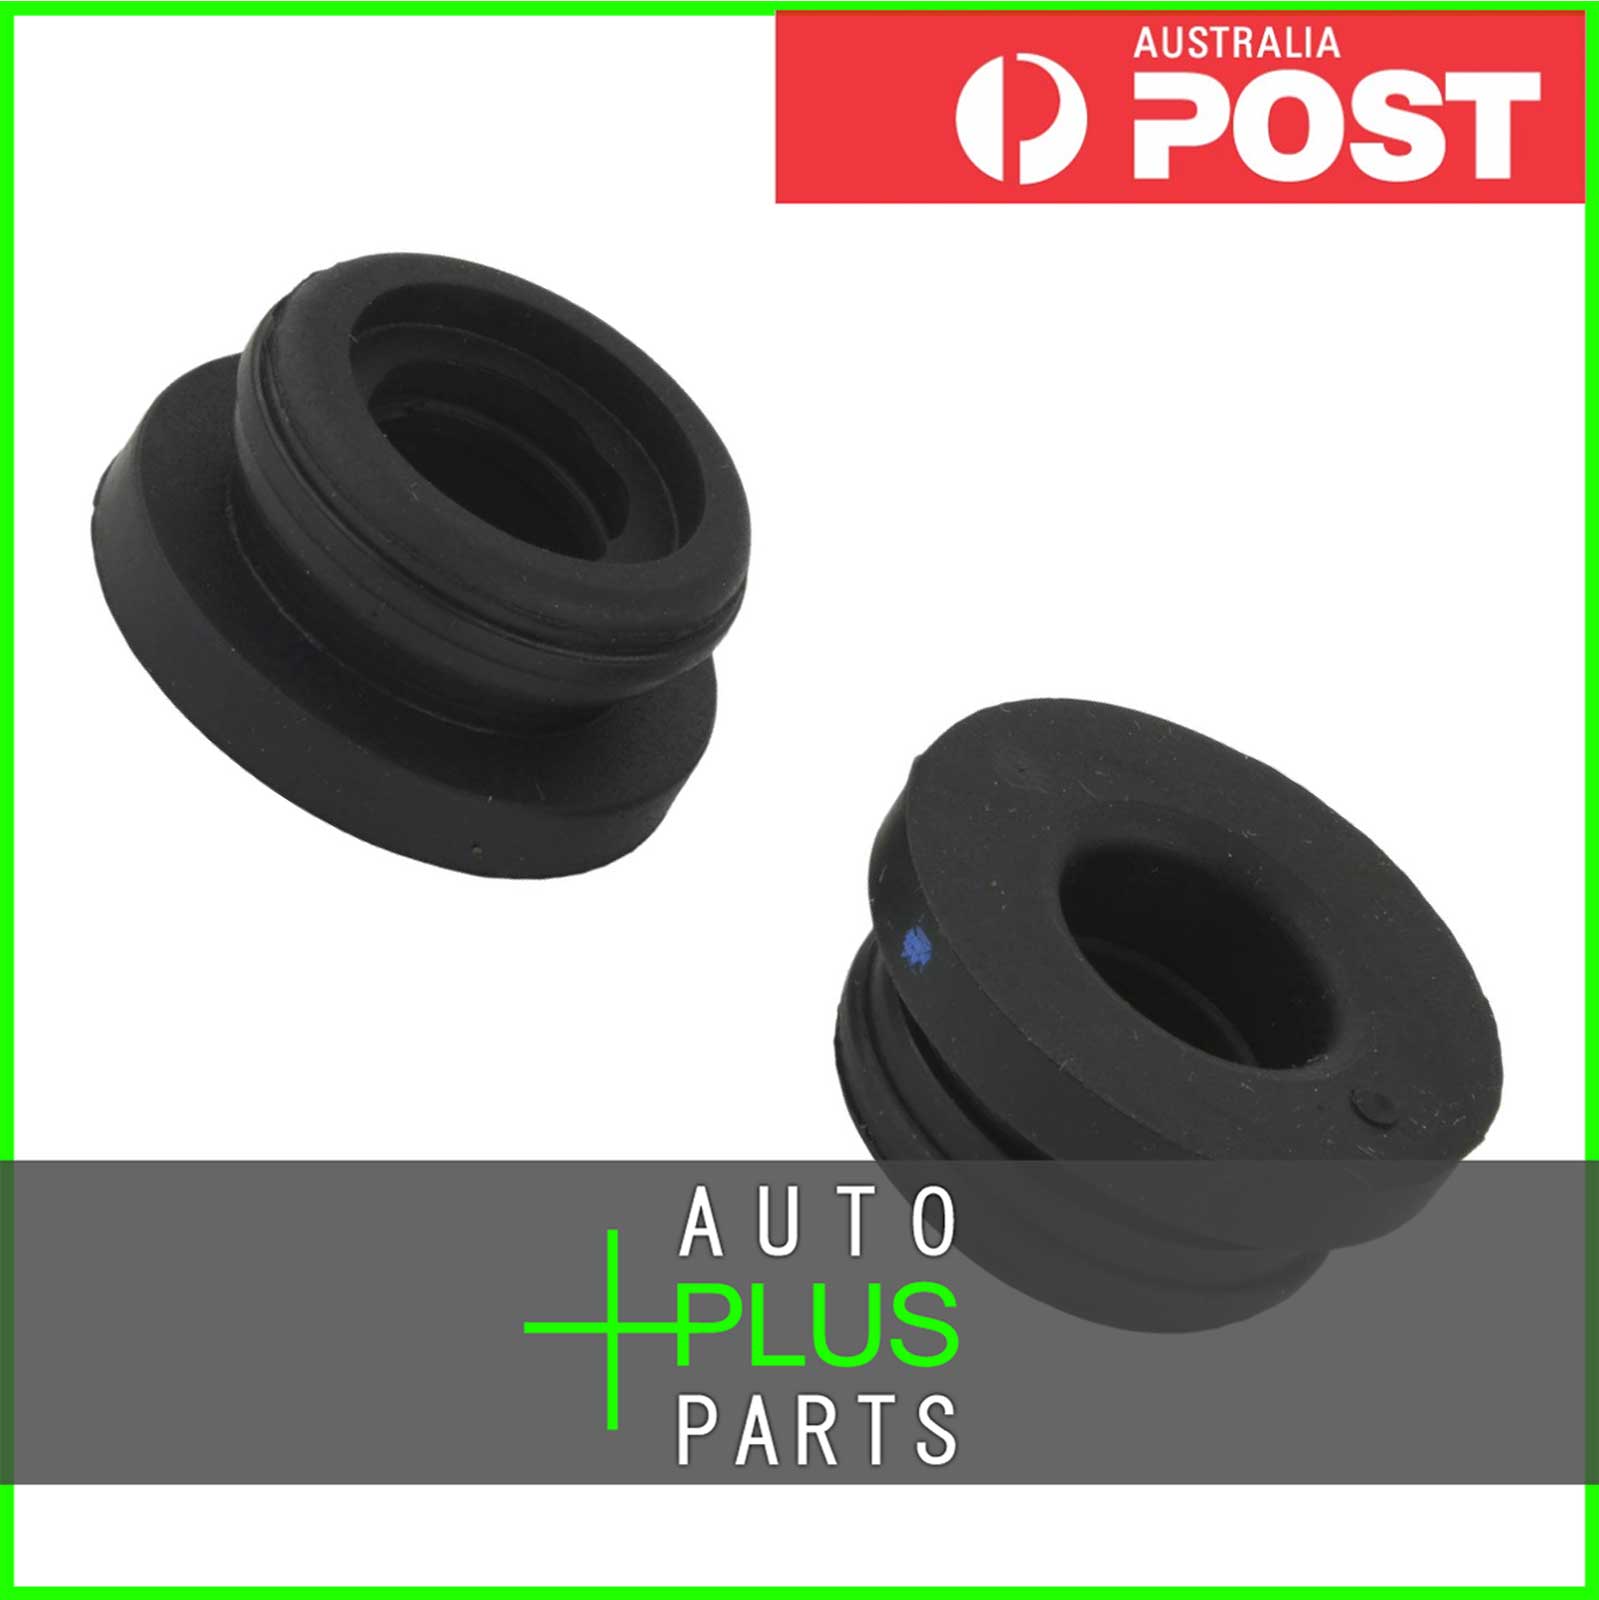 Fits MERCEDES BENZ S 420 BRAKE MASTER CYLINDER REPAIR KIT Product Photo